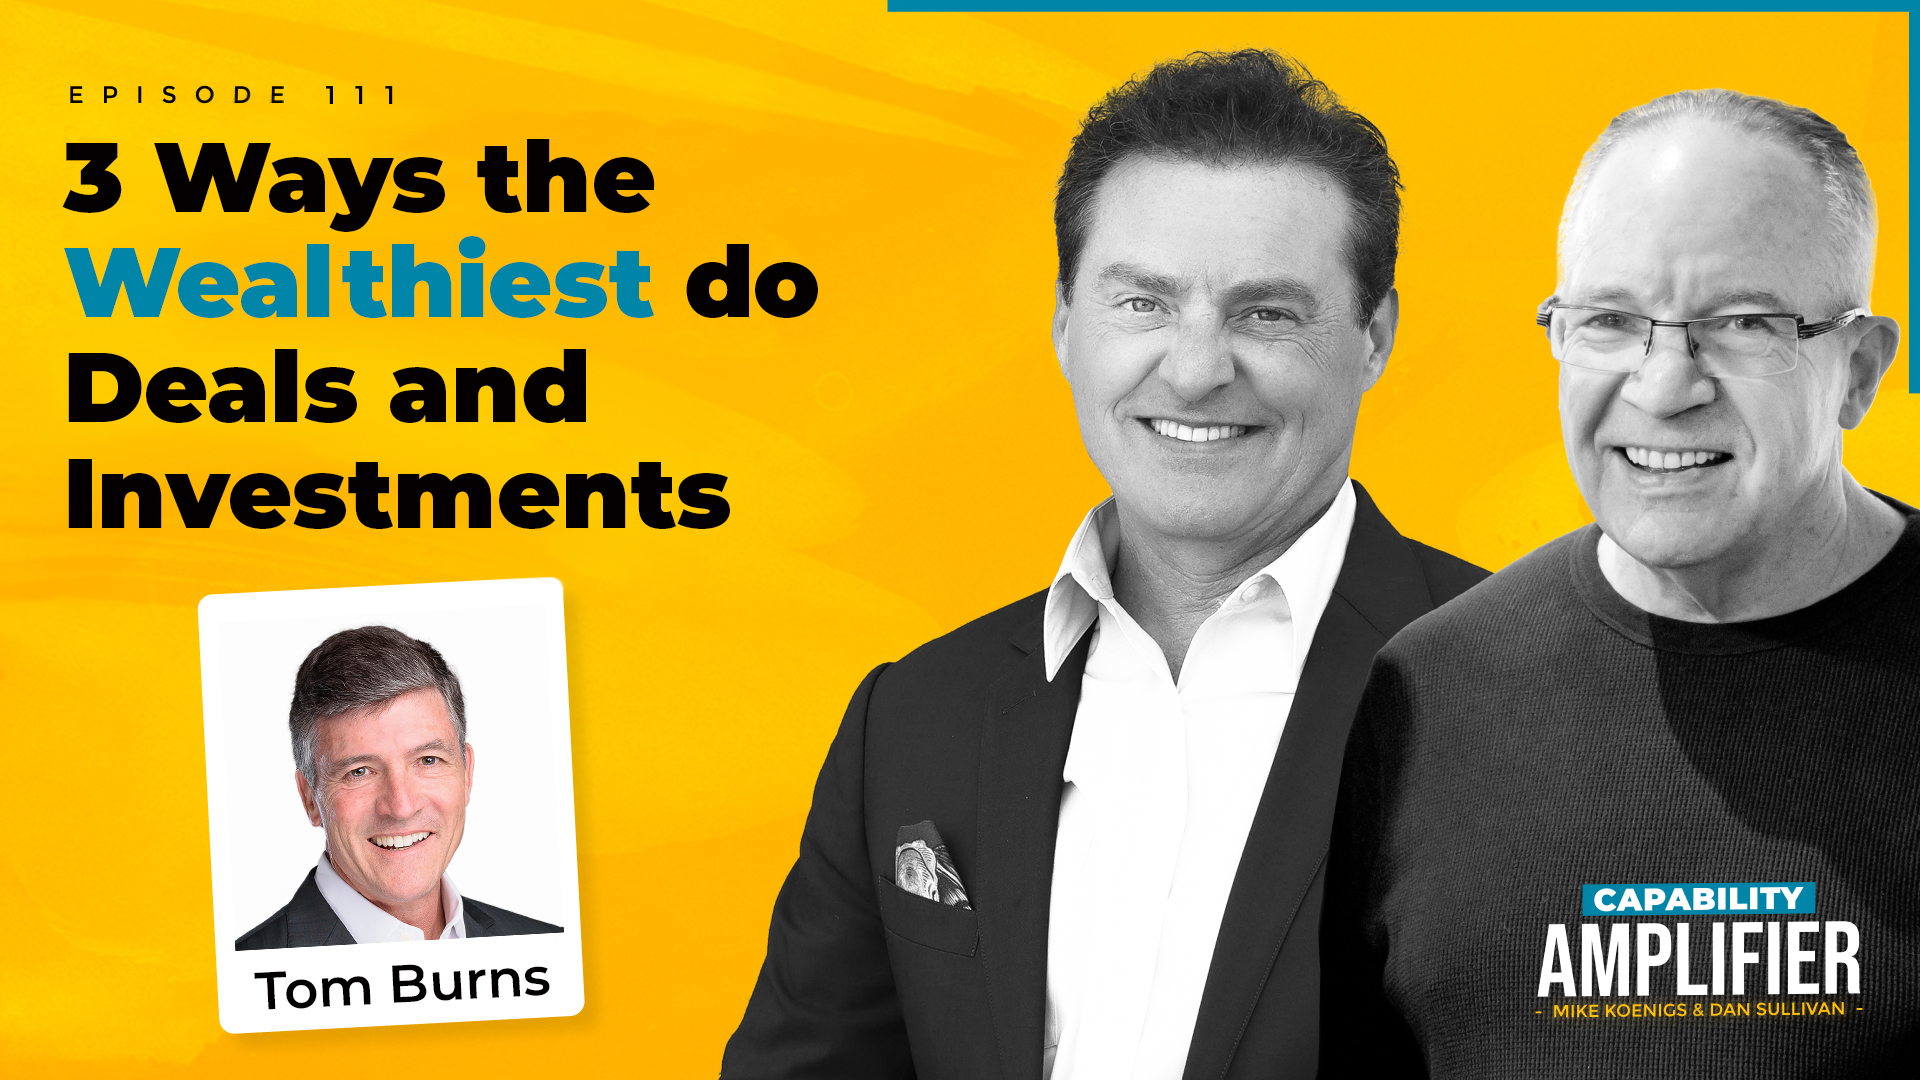 Episode 111 Art: Text reading "3 Ways the Wealthiest Do Deals and Investments" on a yellow background with photos of Mike Koenigs, Dan Sullivan and Tom Burns